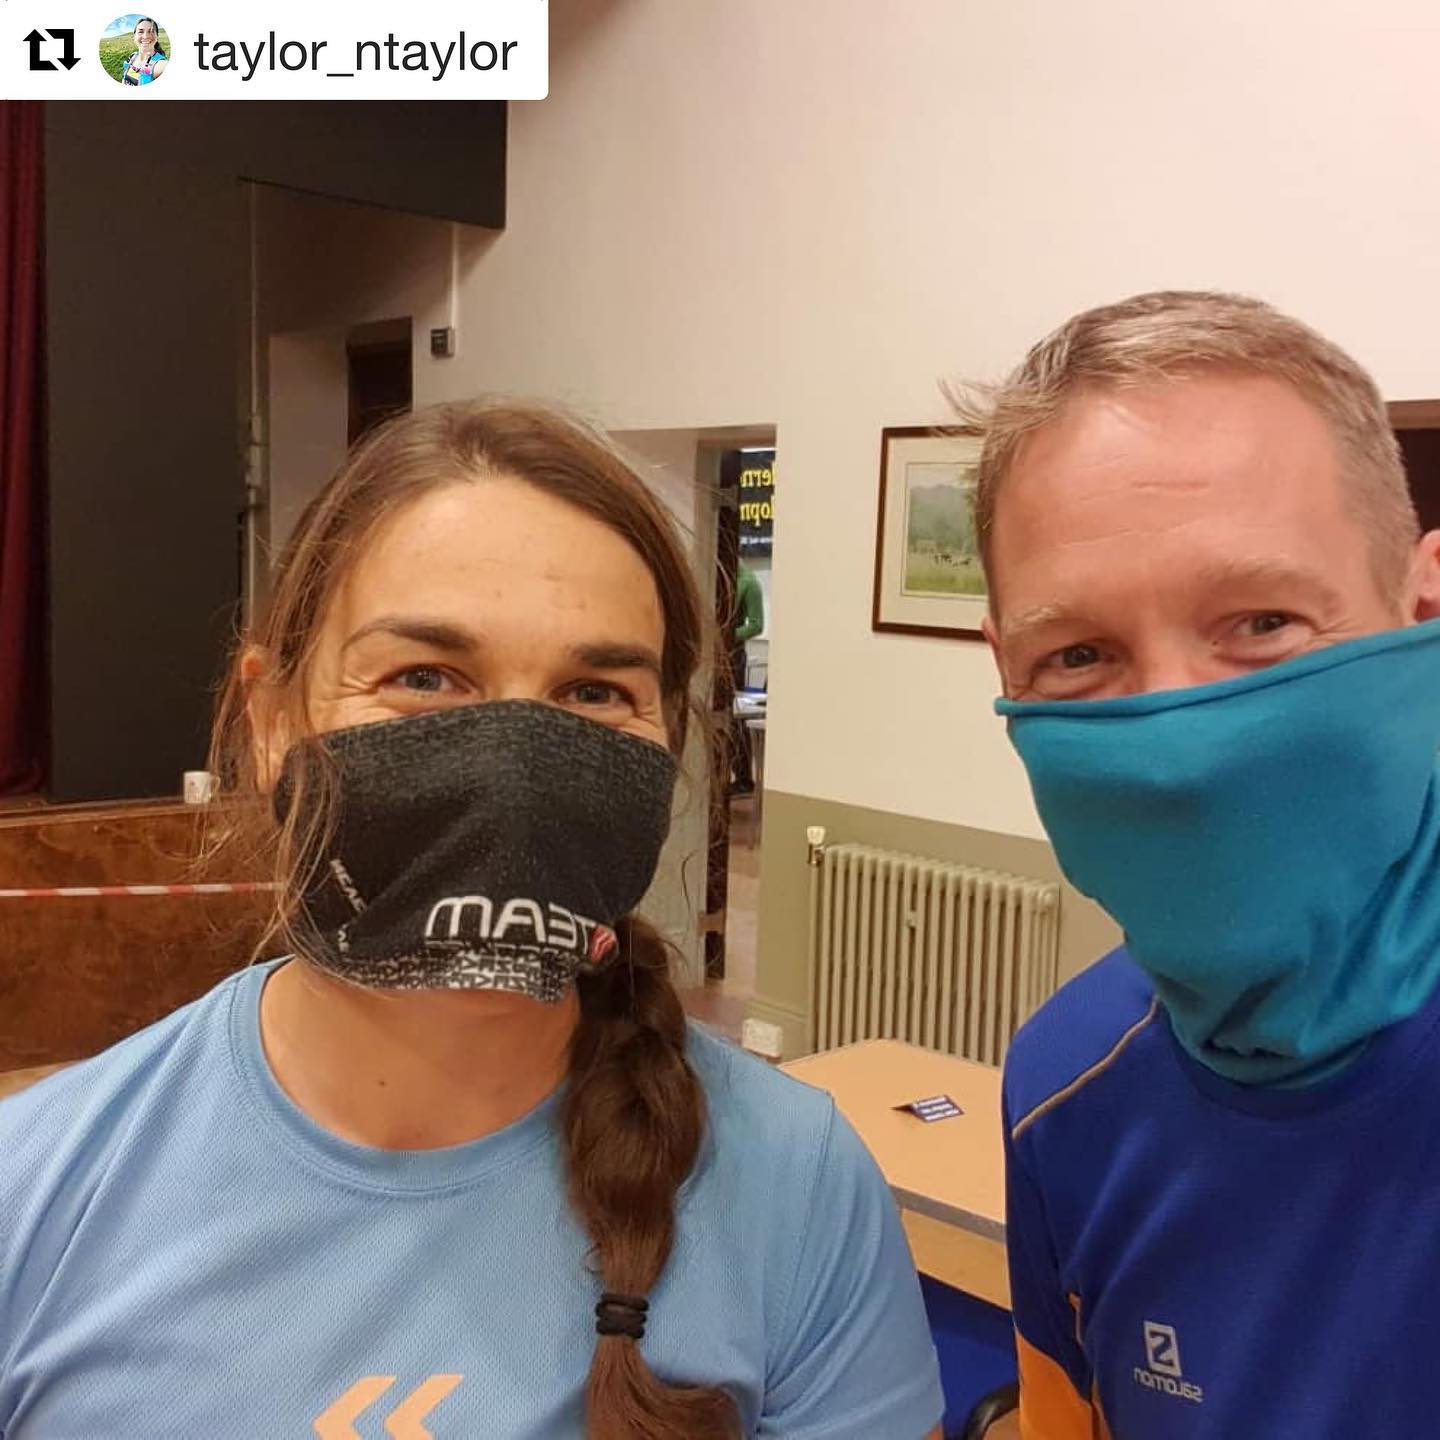 Lovely to see these photos from @taylor_ntaylor - great to have you along! @peakdistrictchallenge ⛰

What a weekend. Thanks to Wilderness Development for a well run, social distance compliant 100km Peak Challenge. Started at 9pm friday finished lunchtime Sat. Good navigation practice for #YallaGo_2020